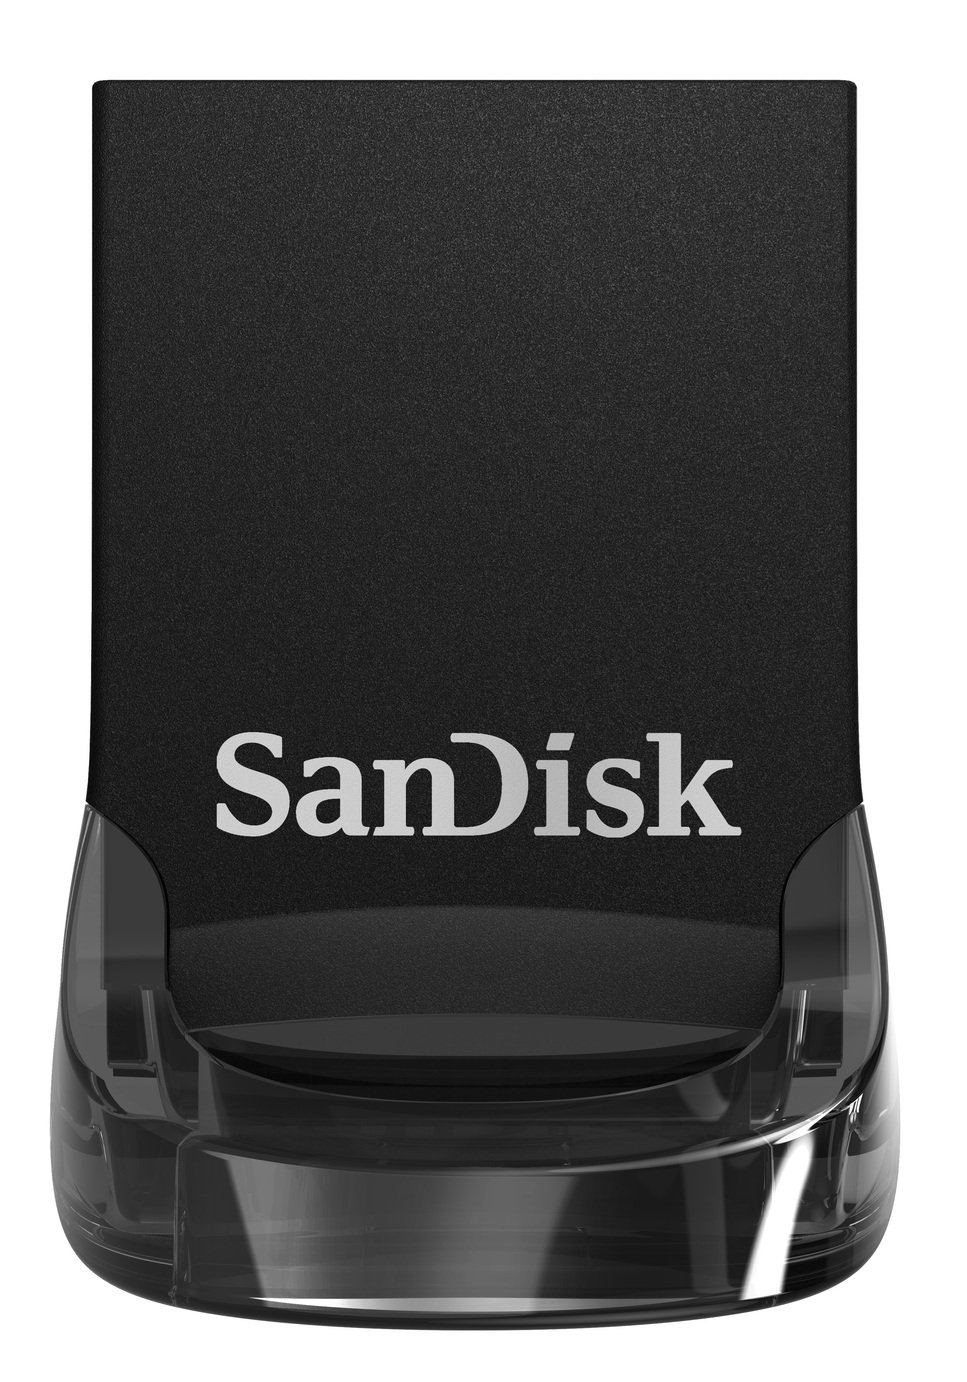 SanDisk Ultra Fit 130MB/s USB 3.1 Flash Drive Review